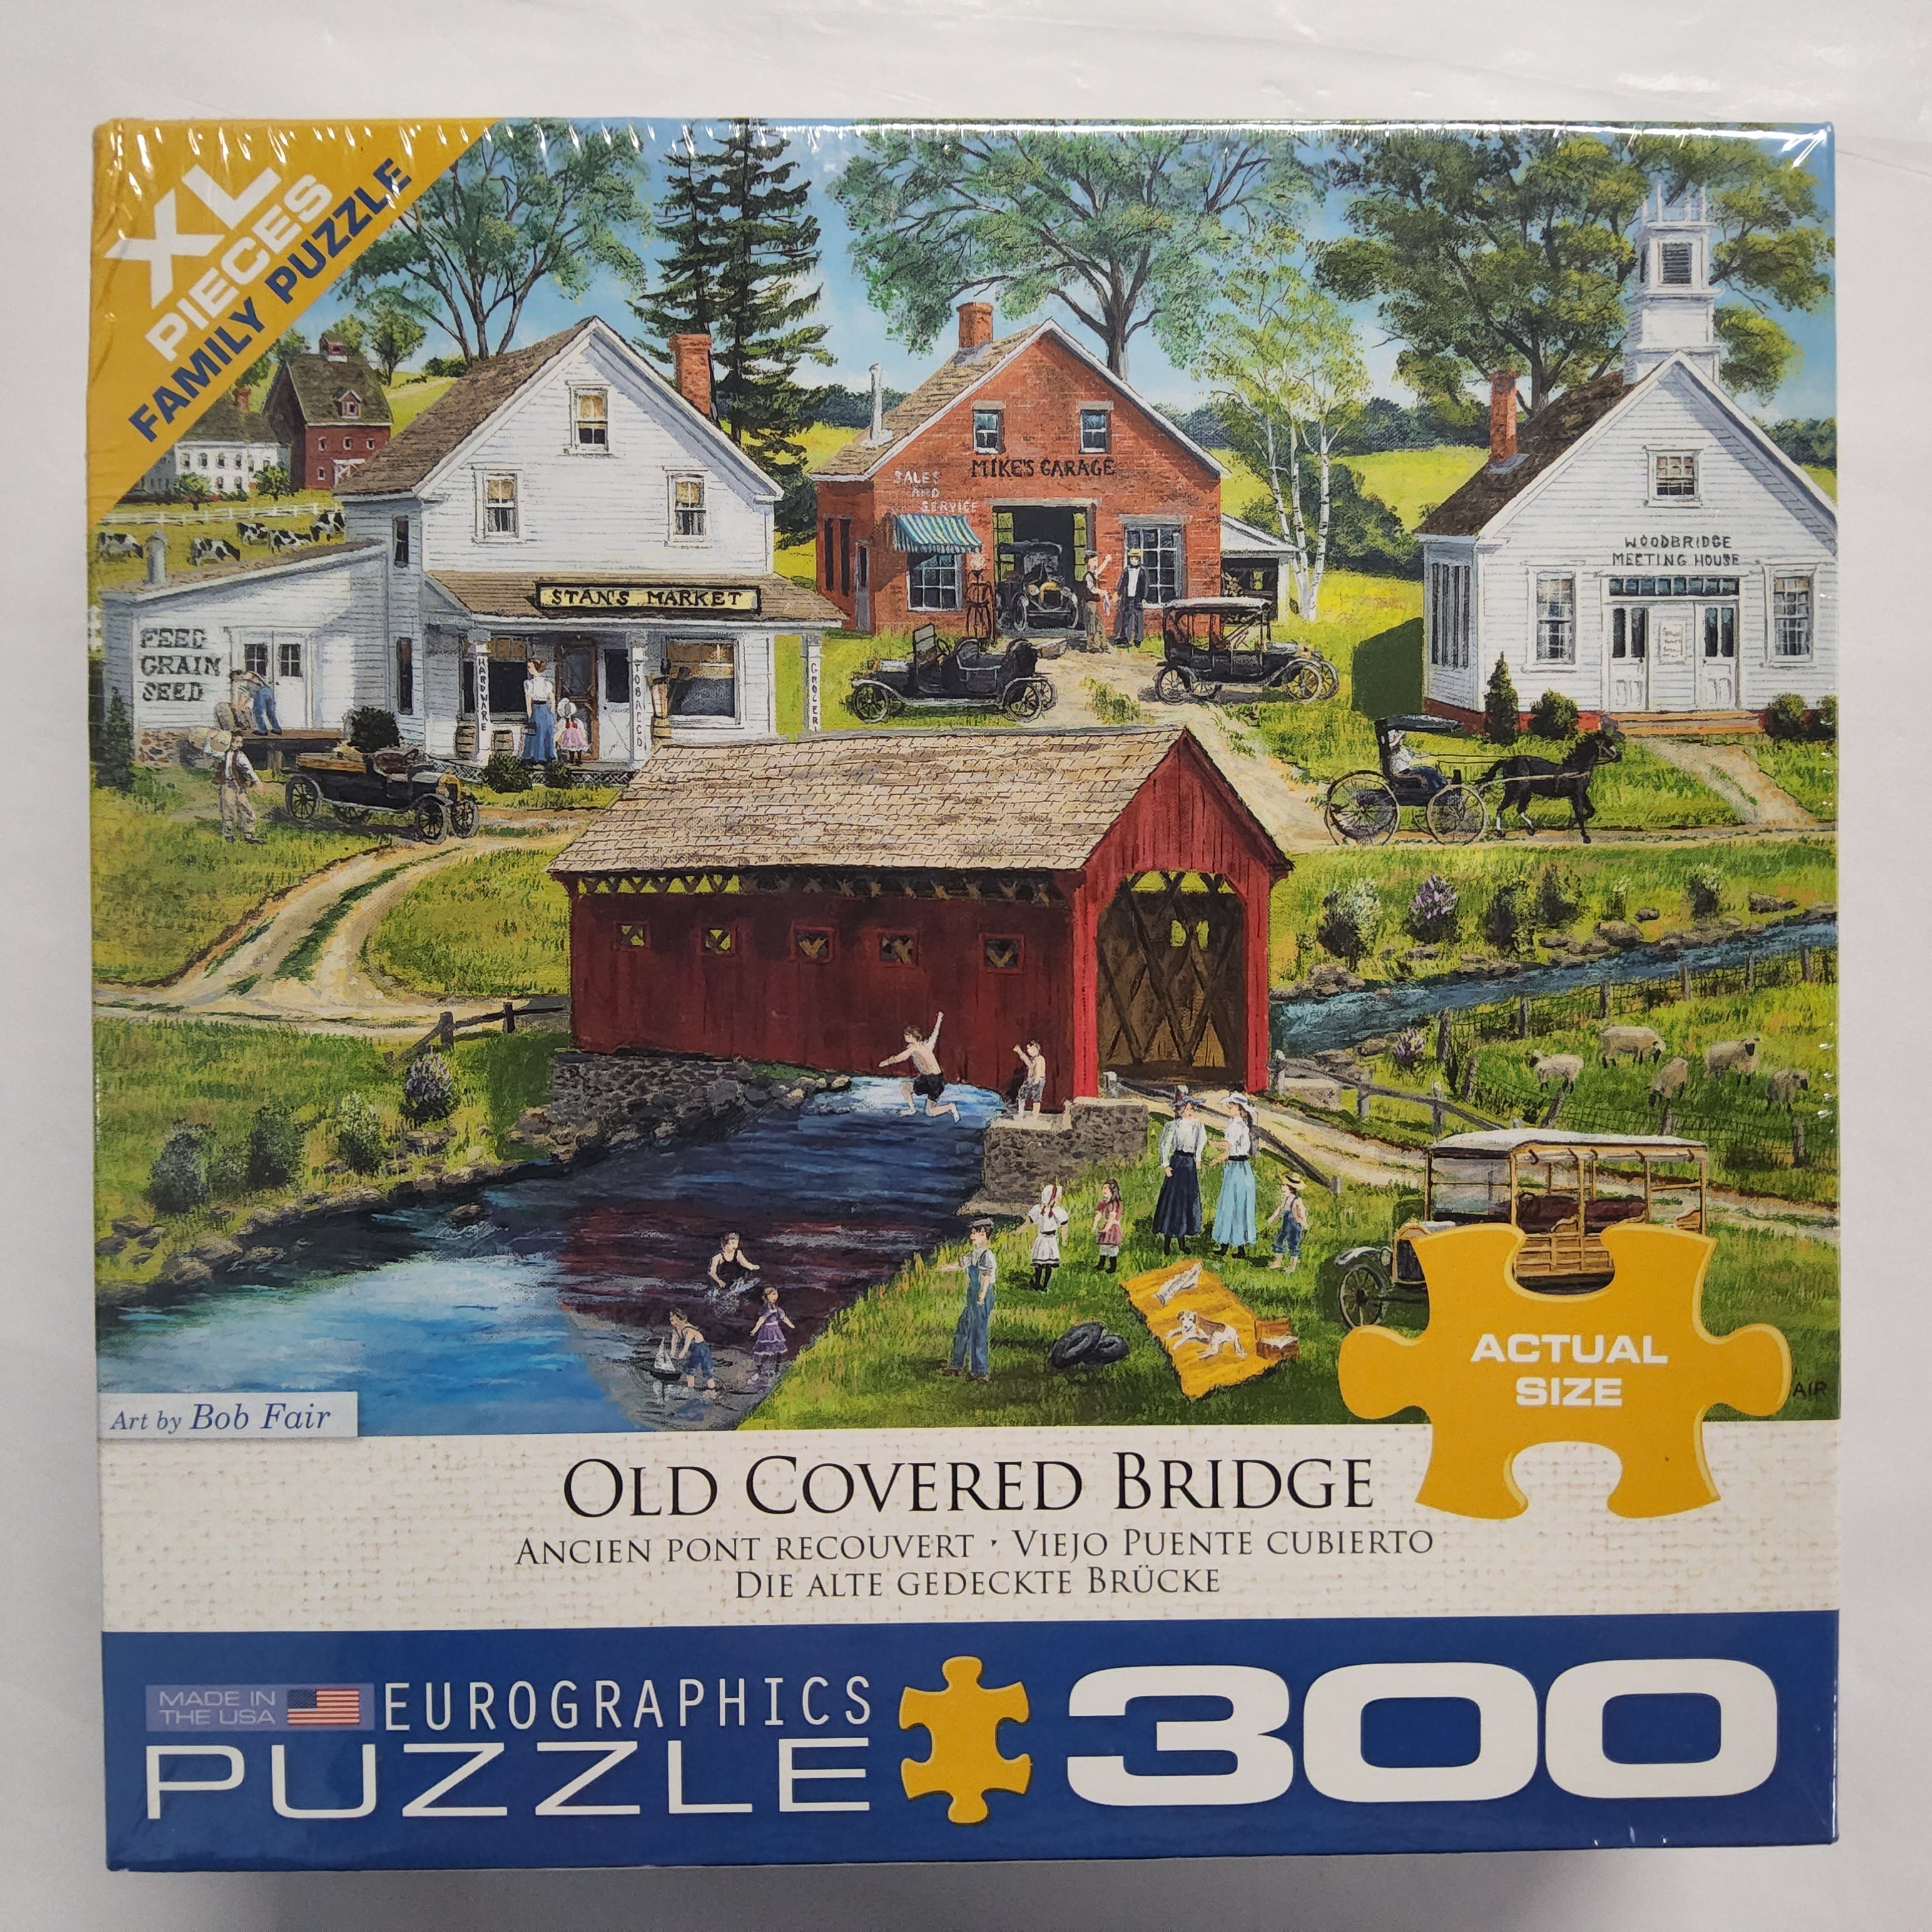 Eurographics Puzzle - Old Covered Bridge - 300 XL pieces - 8300-5383